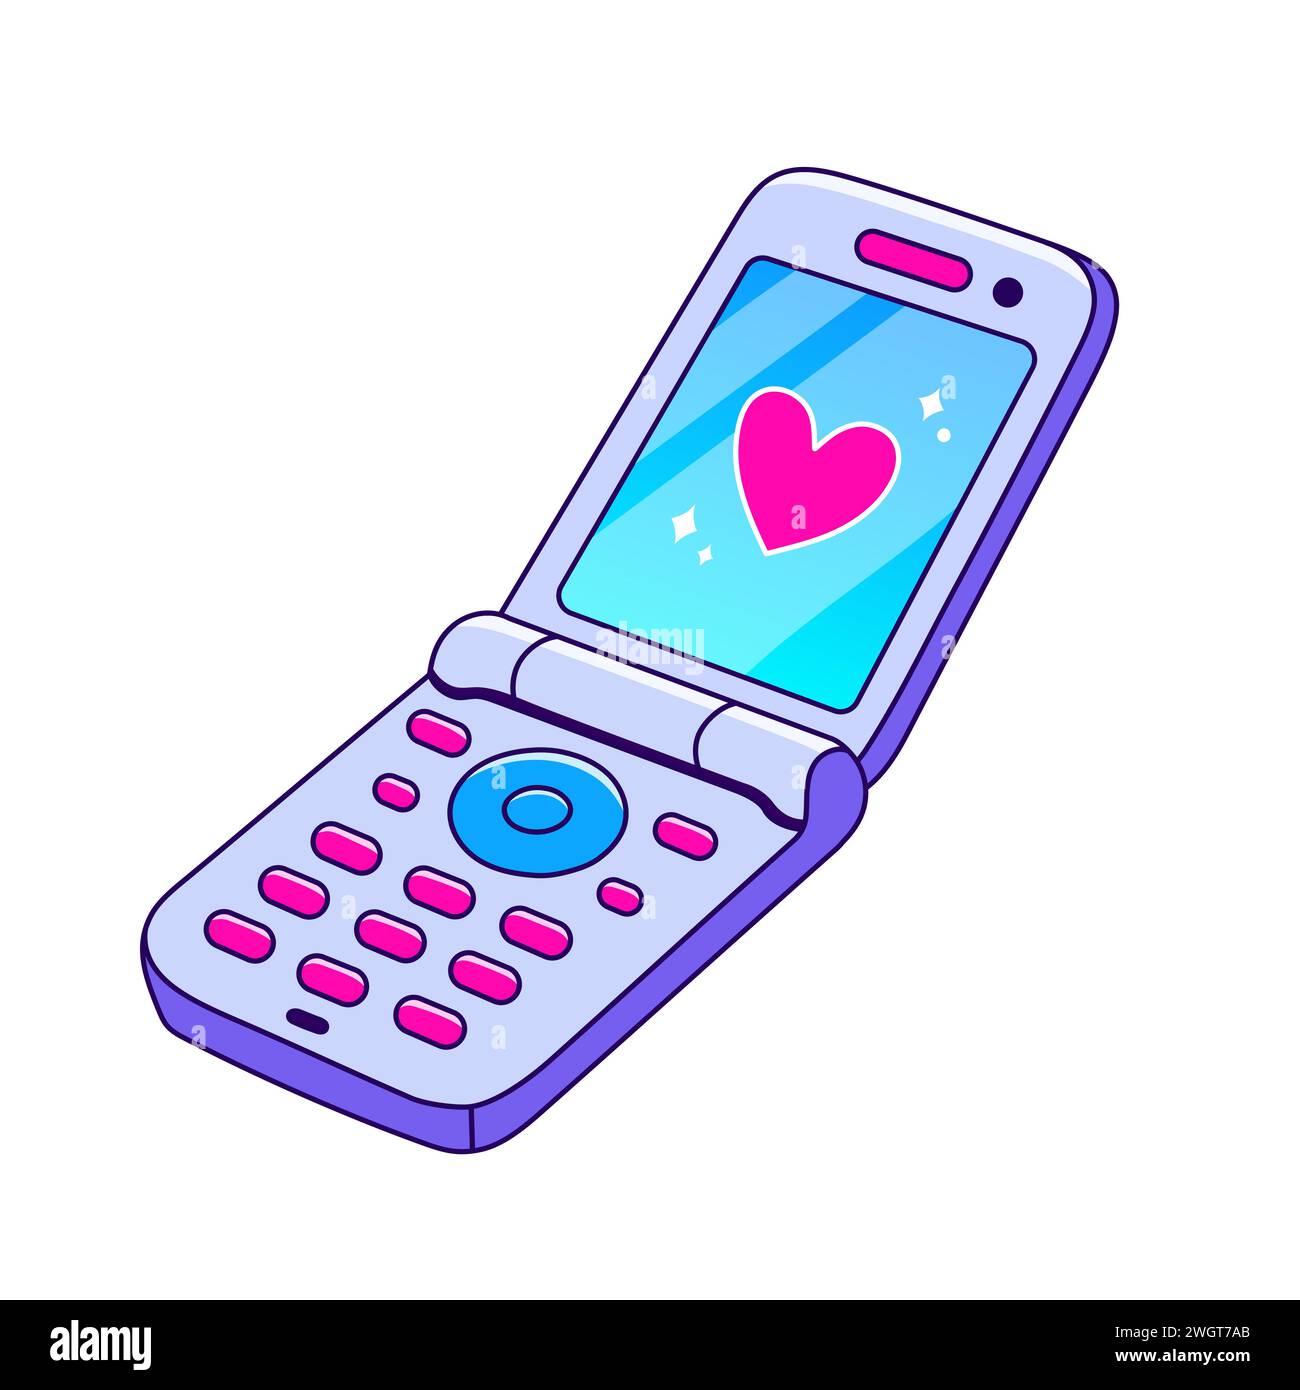 Flip phone Cut Out Stock Images & Pictures - Alamy